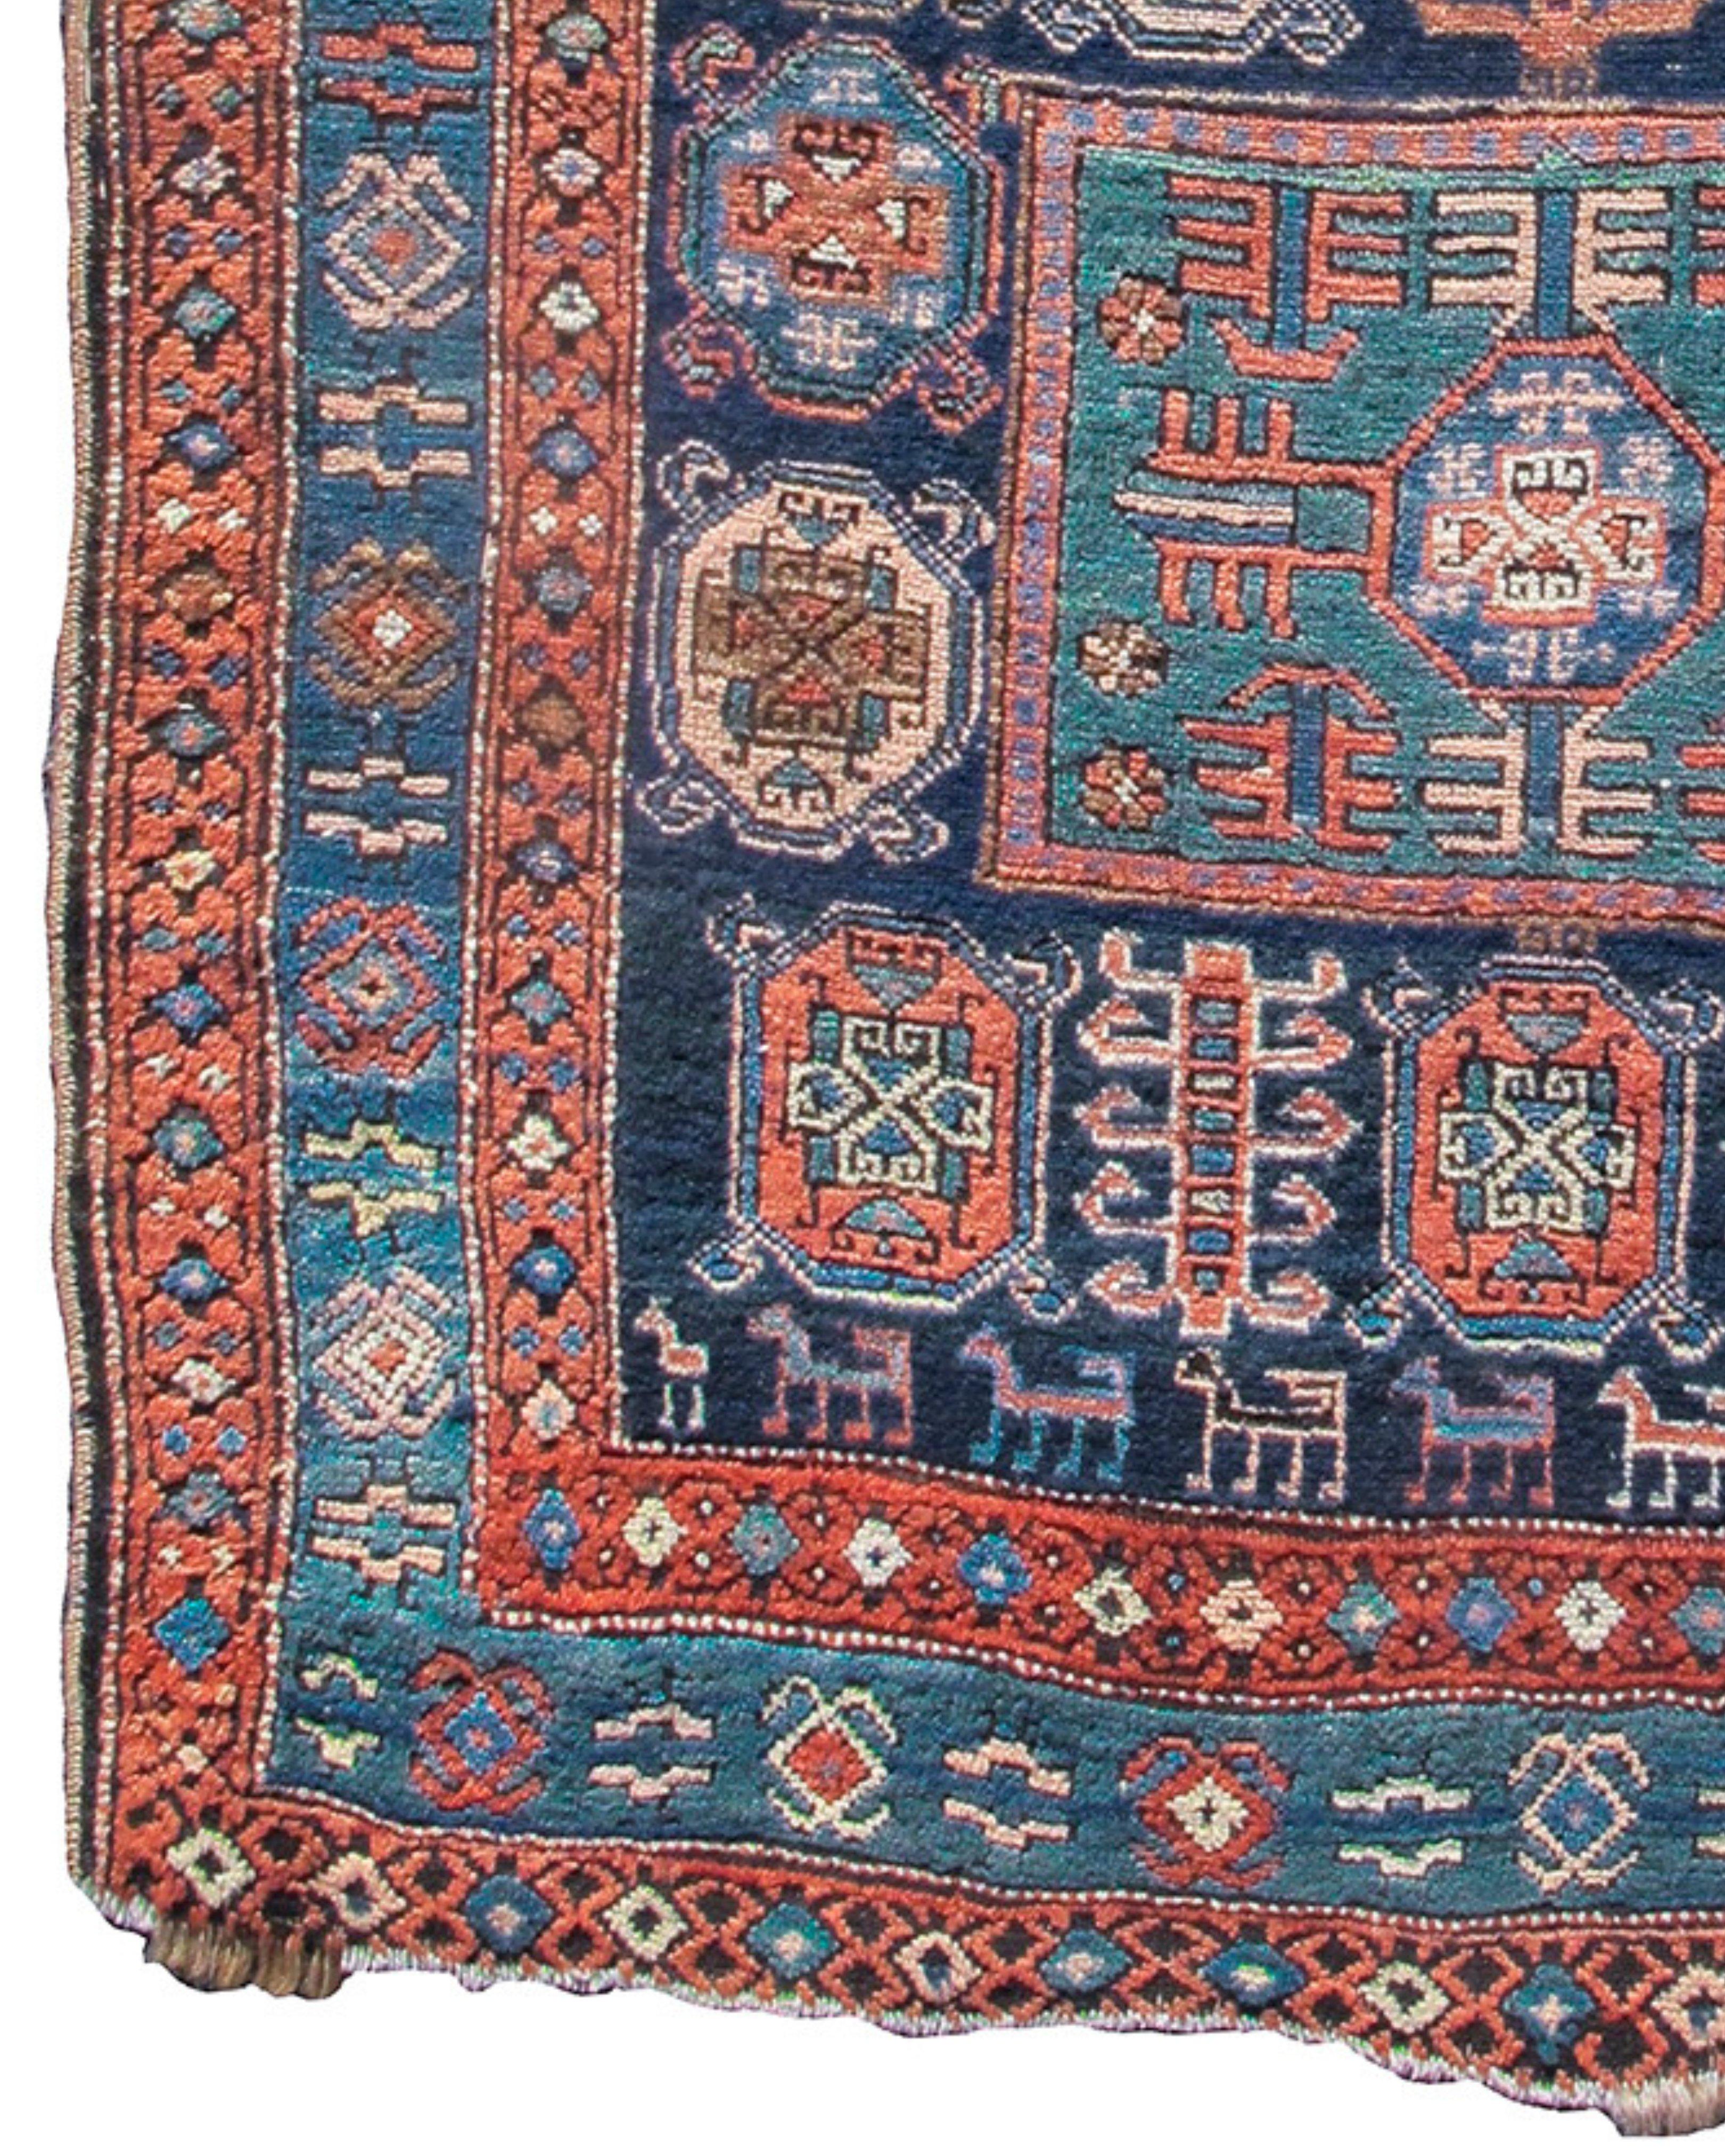 Antique Persian Heriz Rug, Early 20th century In Excellent Condition For Sale In San Francisco, CA